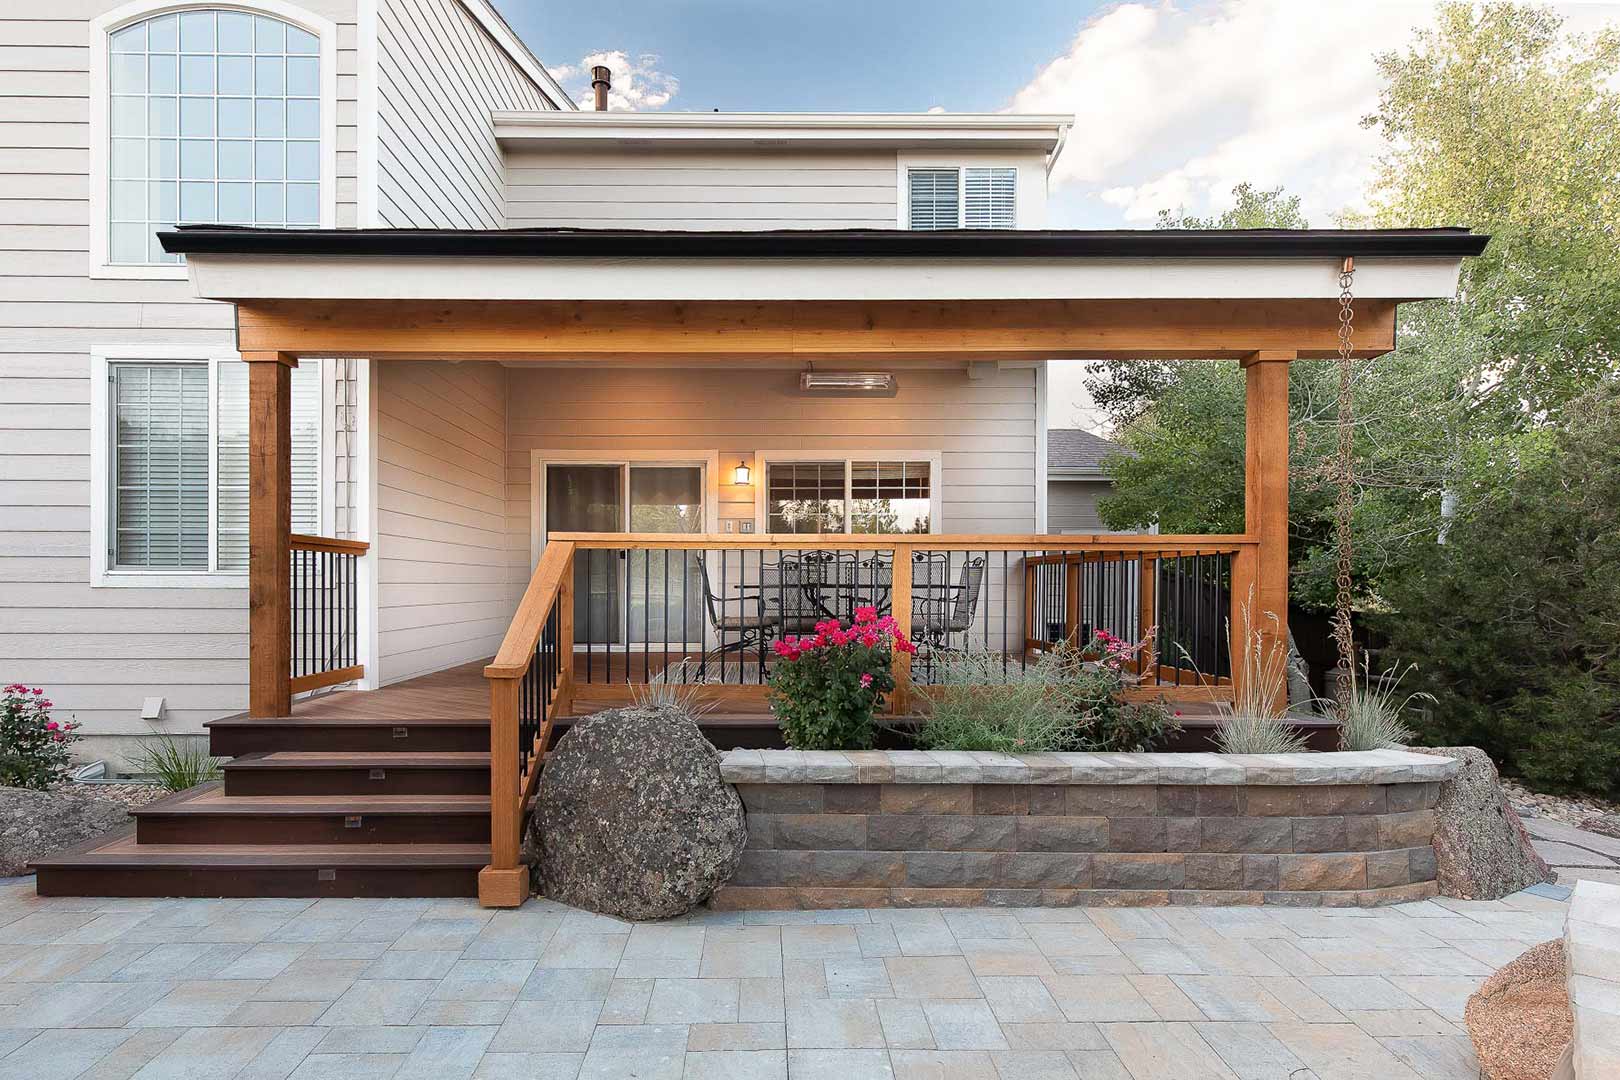 A custom covered deck with a stacked stone rock planter bed